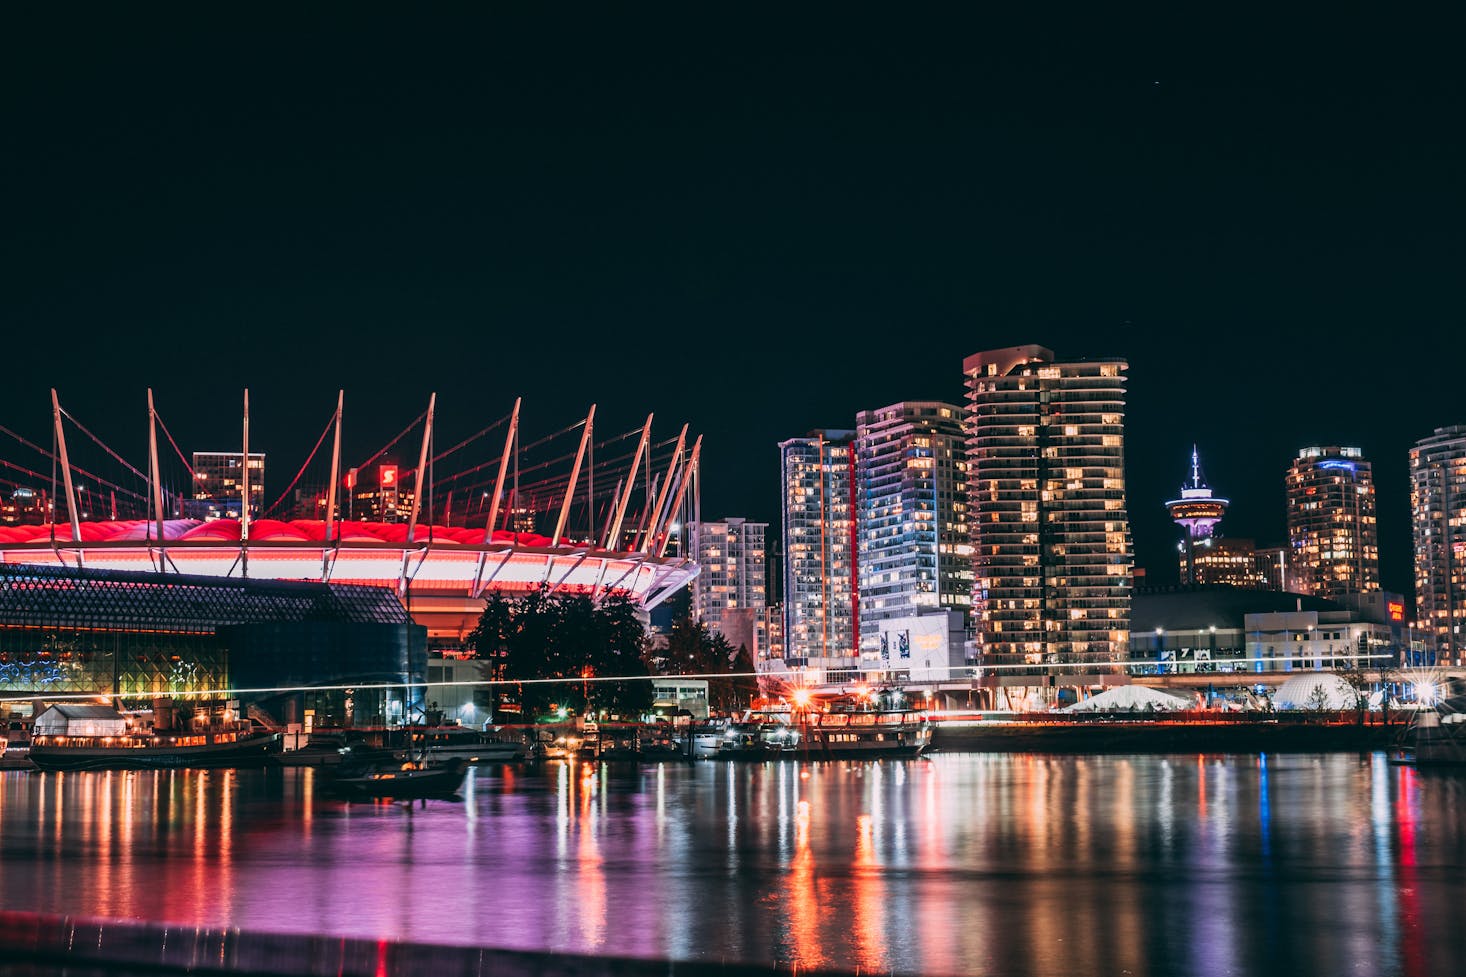 Things to do in Vancouver at night